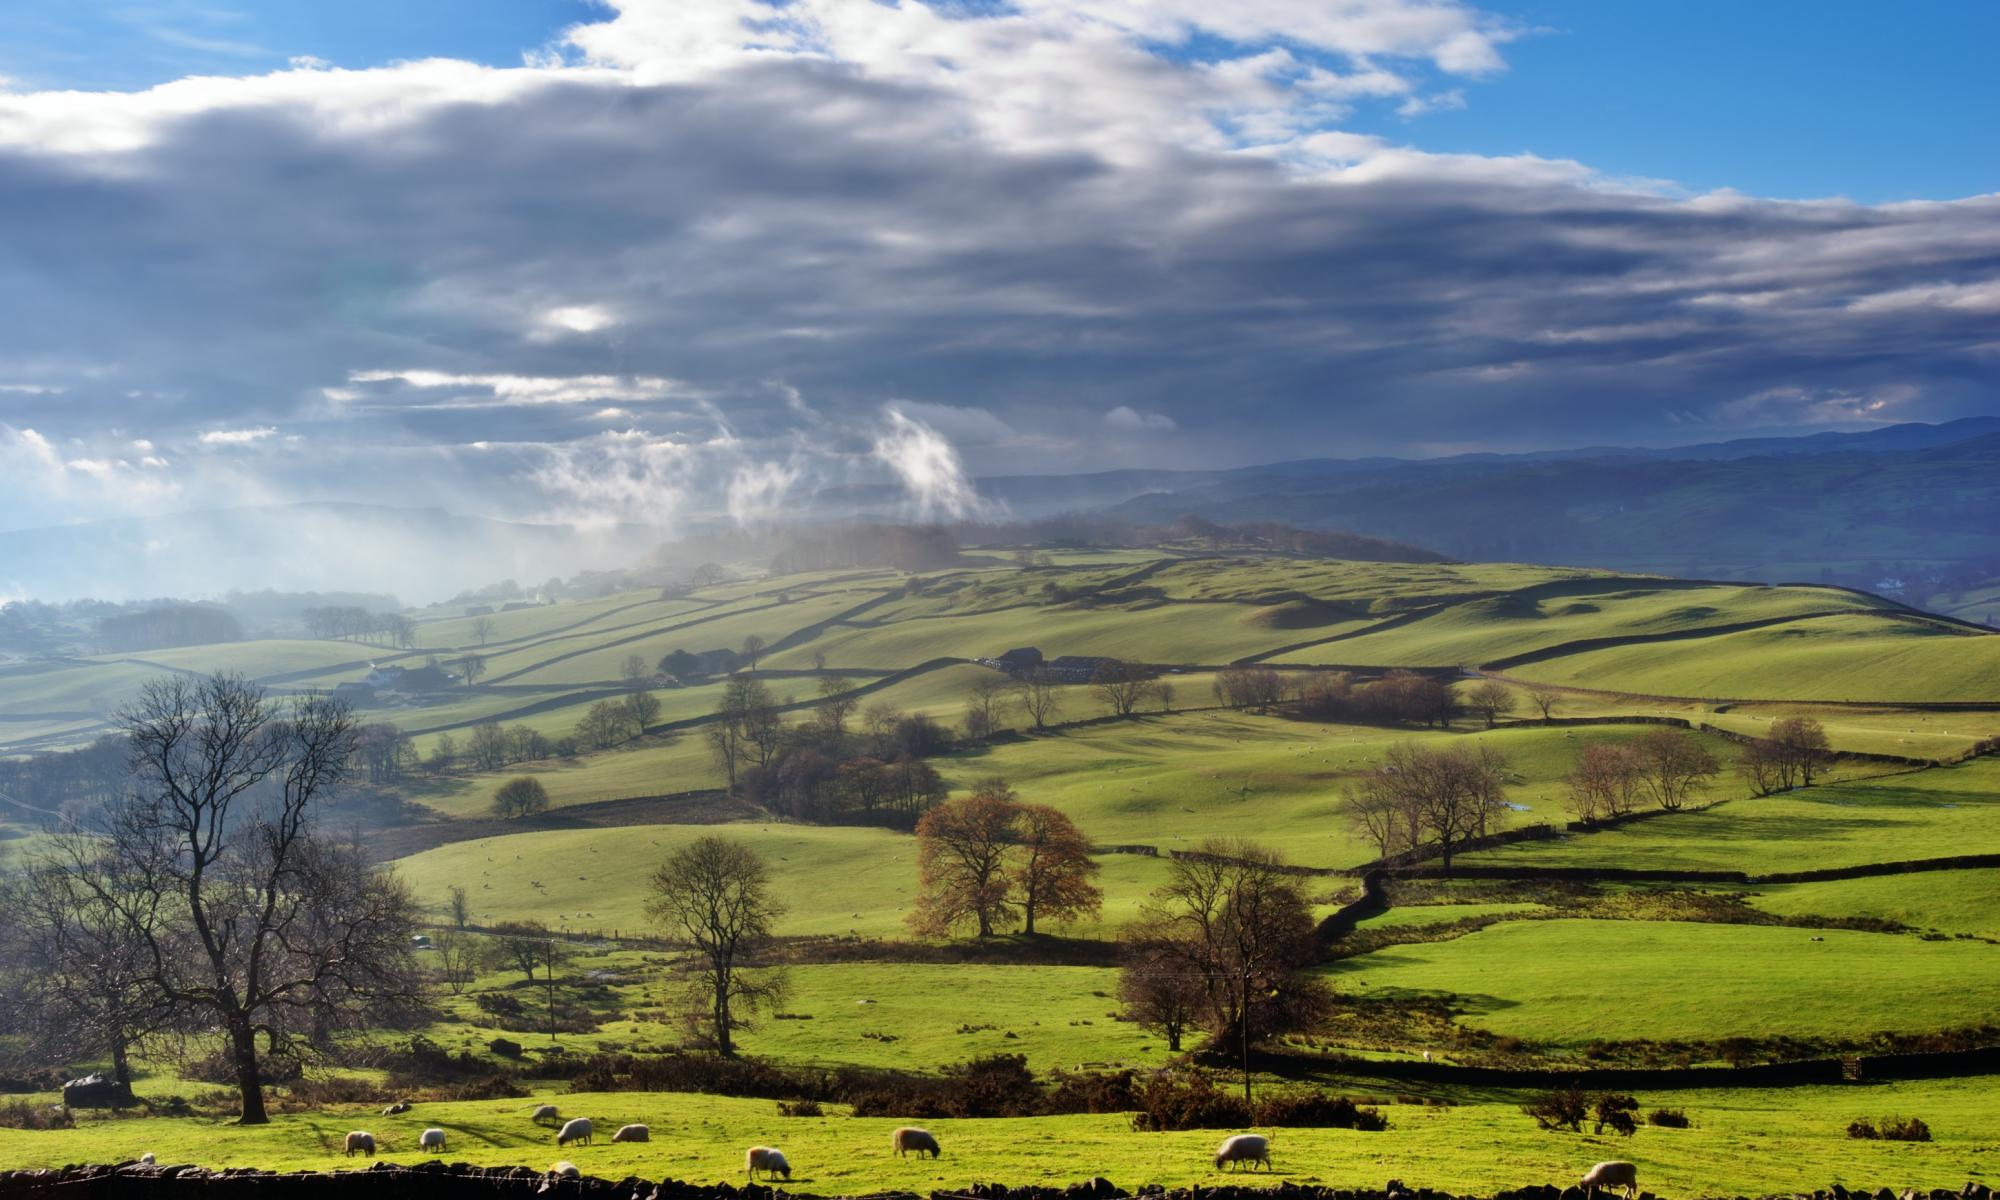 ‘Even bankers need clean air’: Natural England chief warns Truss over threat to green rules